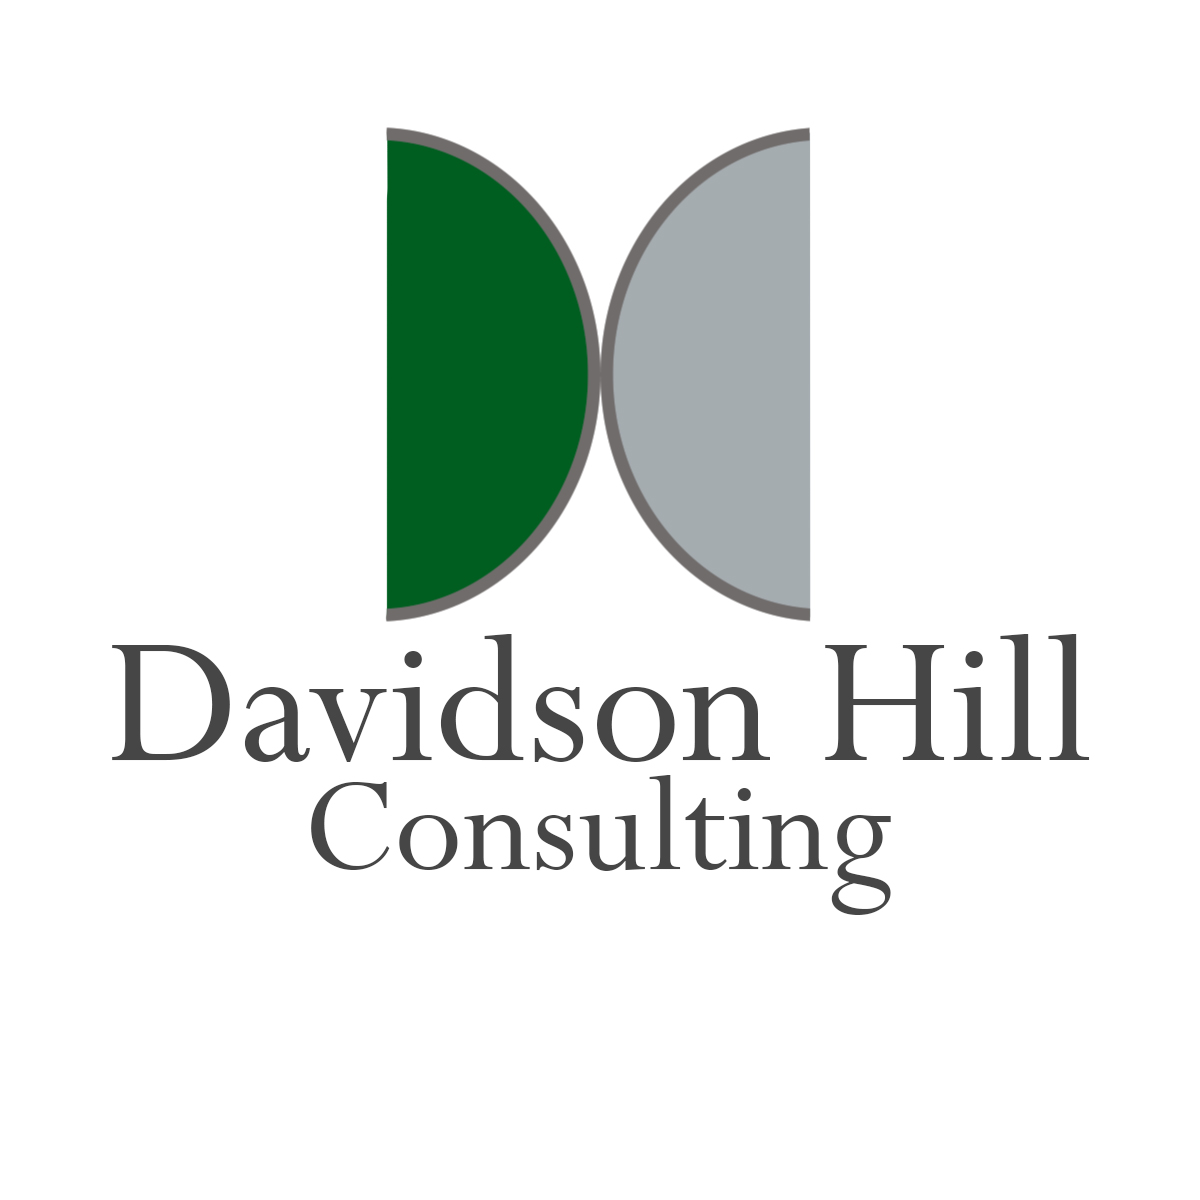 Davidson Hill Consulting